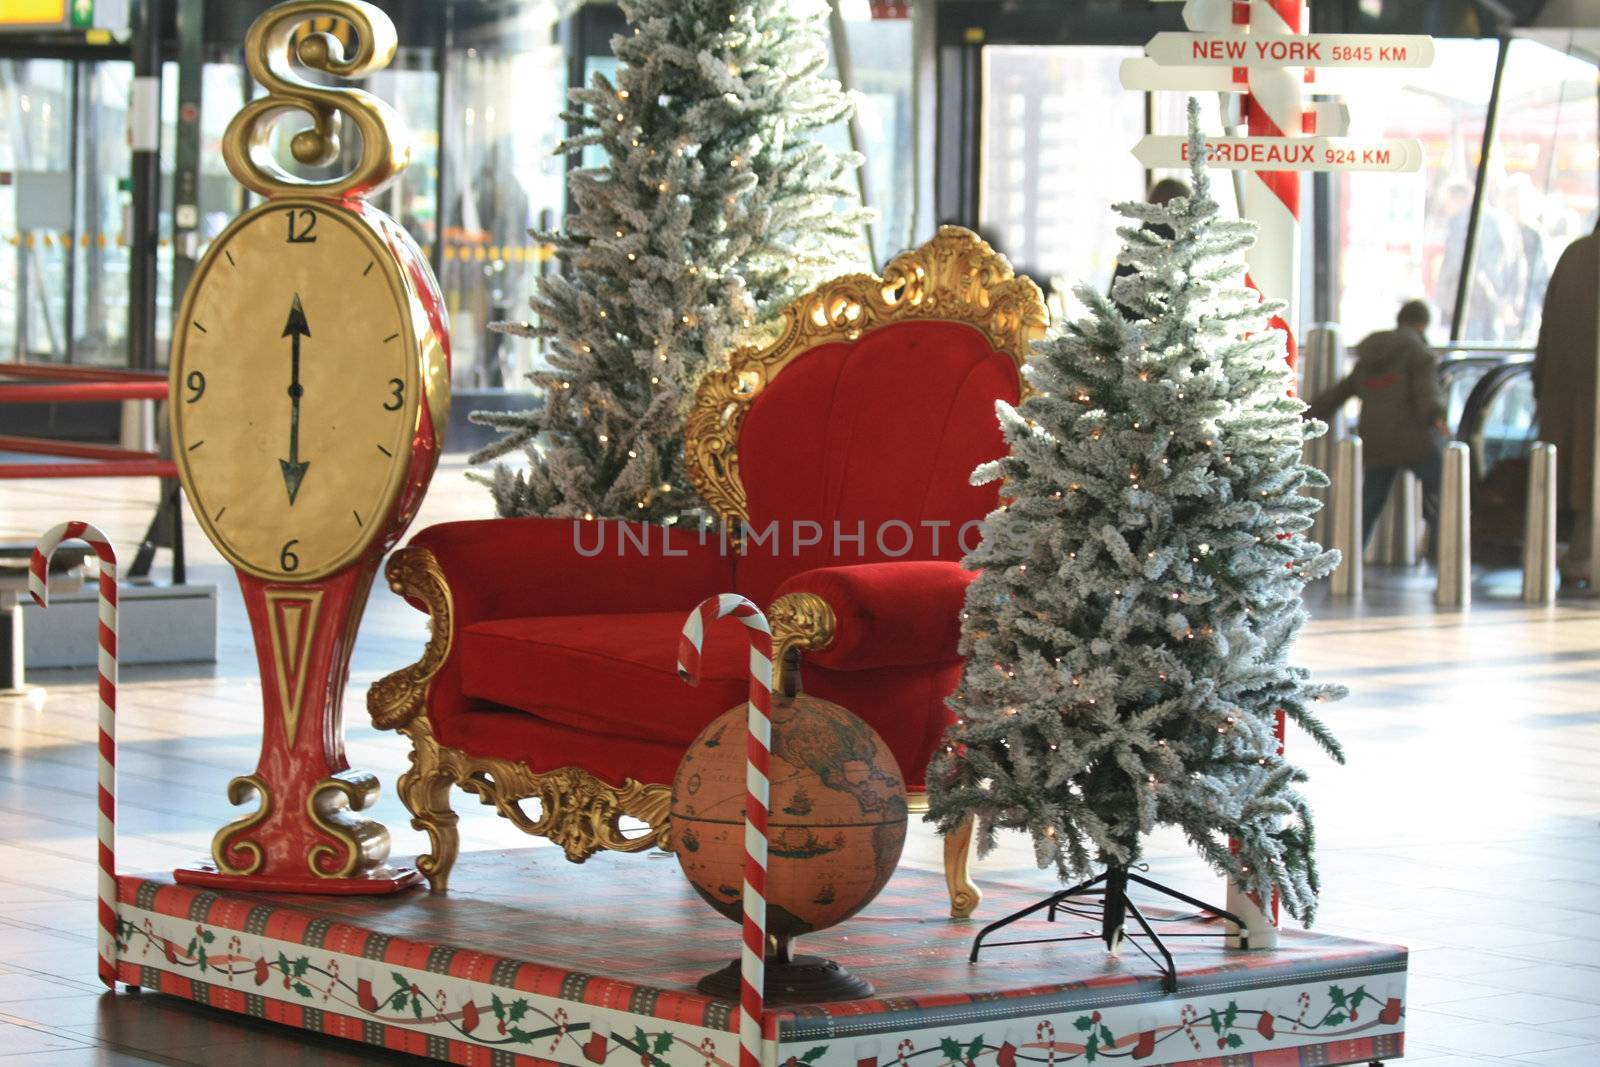 A chair ready for Santa Claus to visit